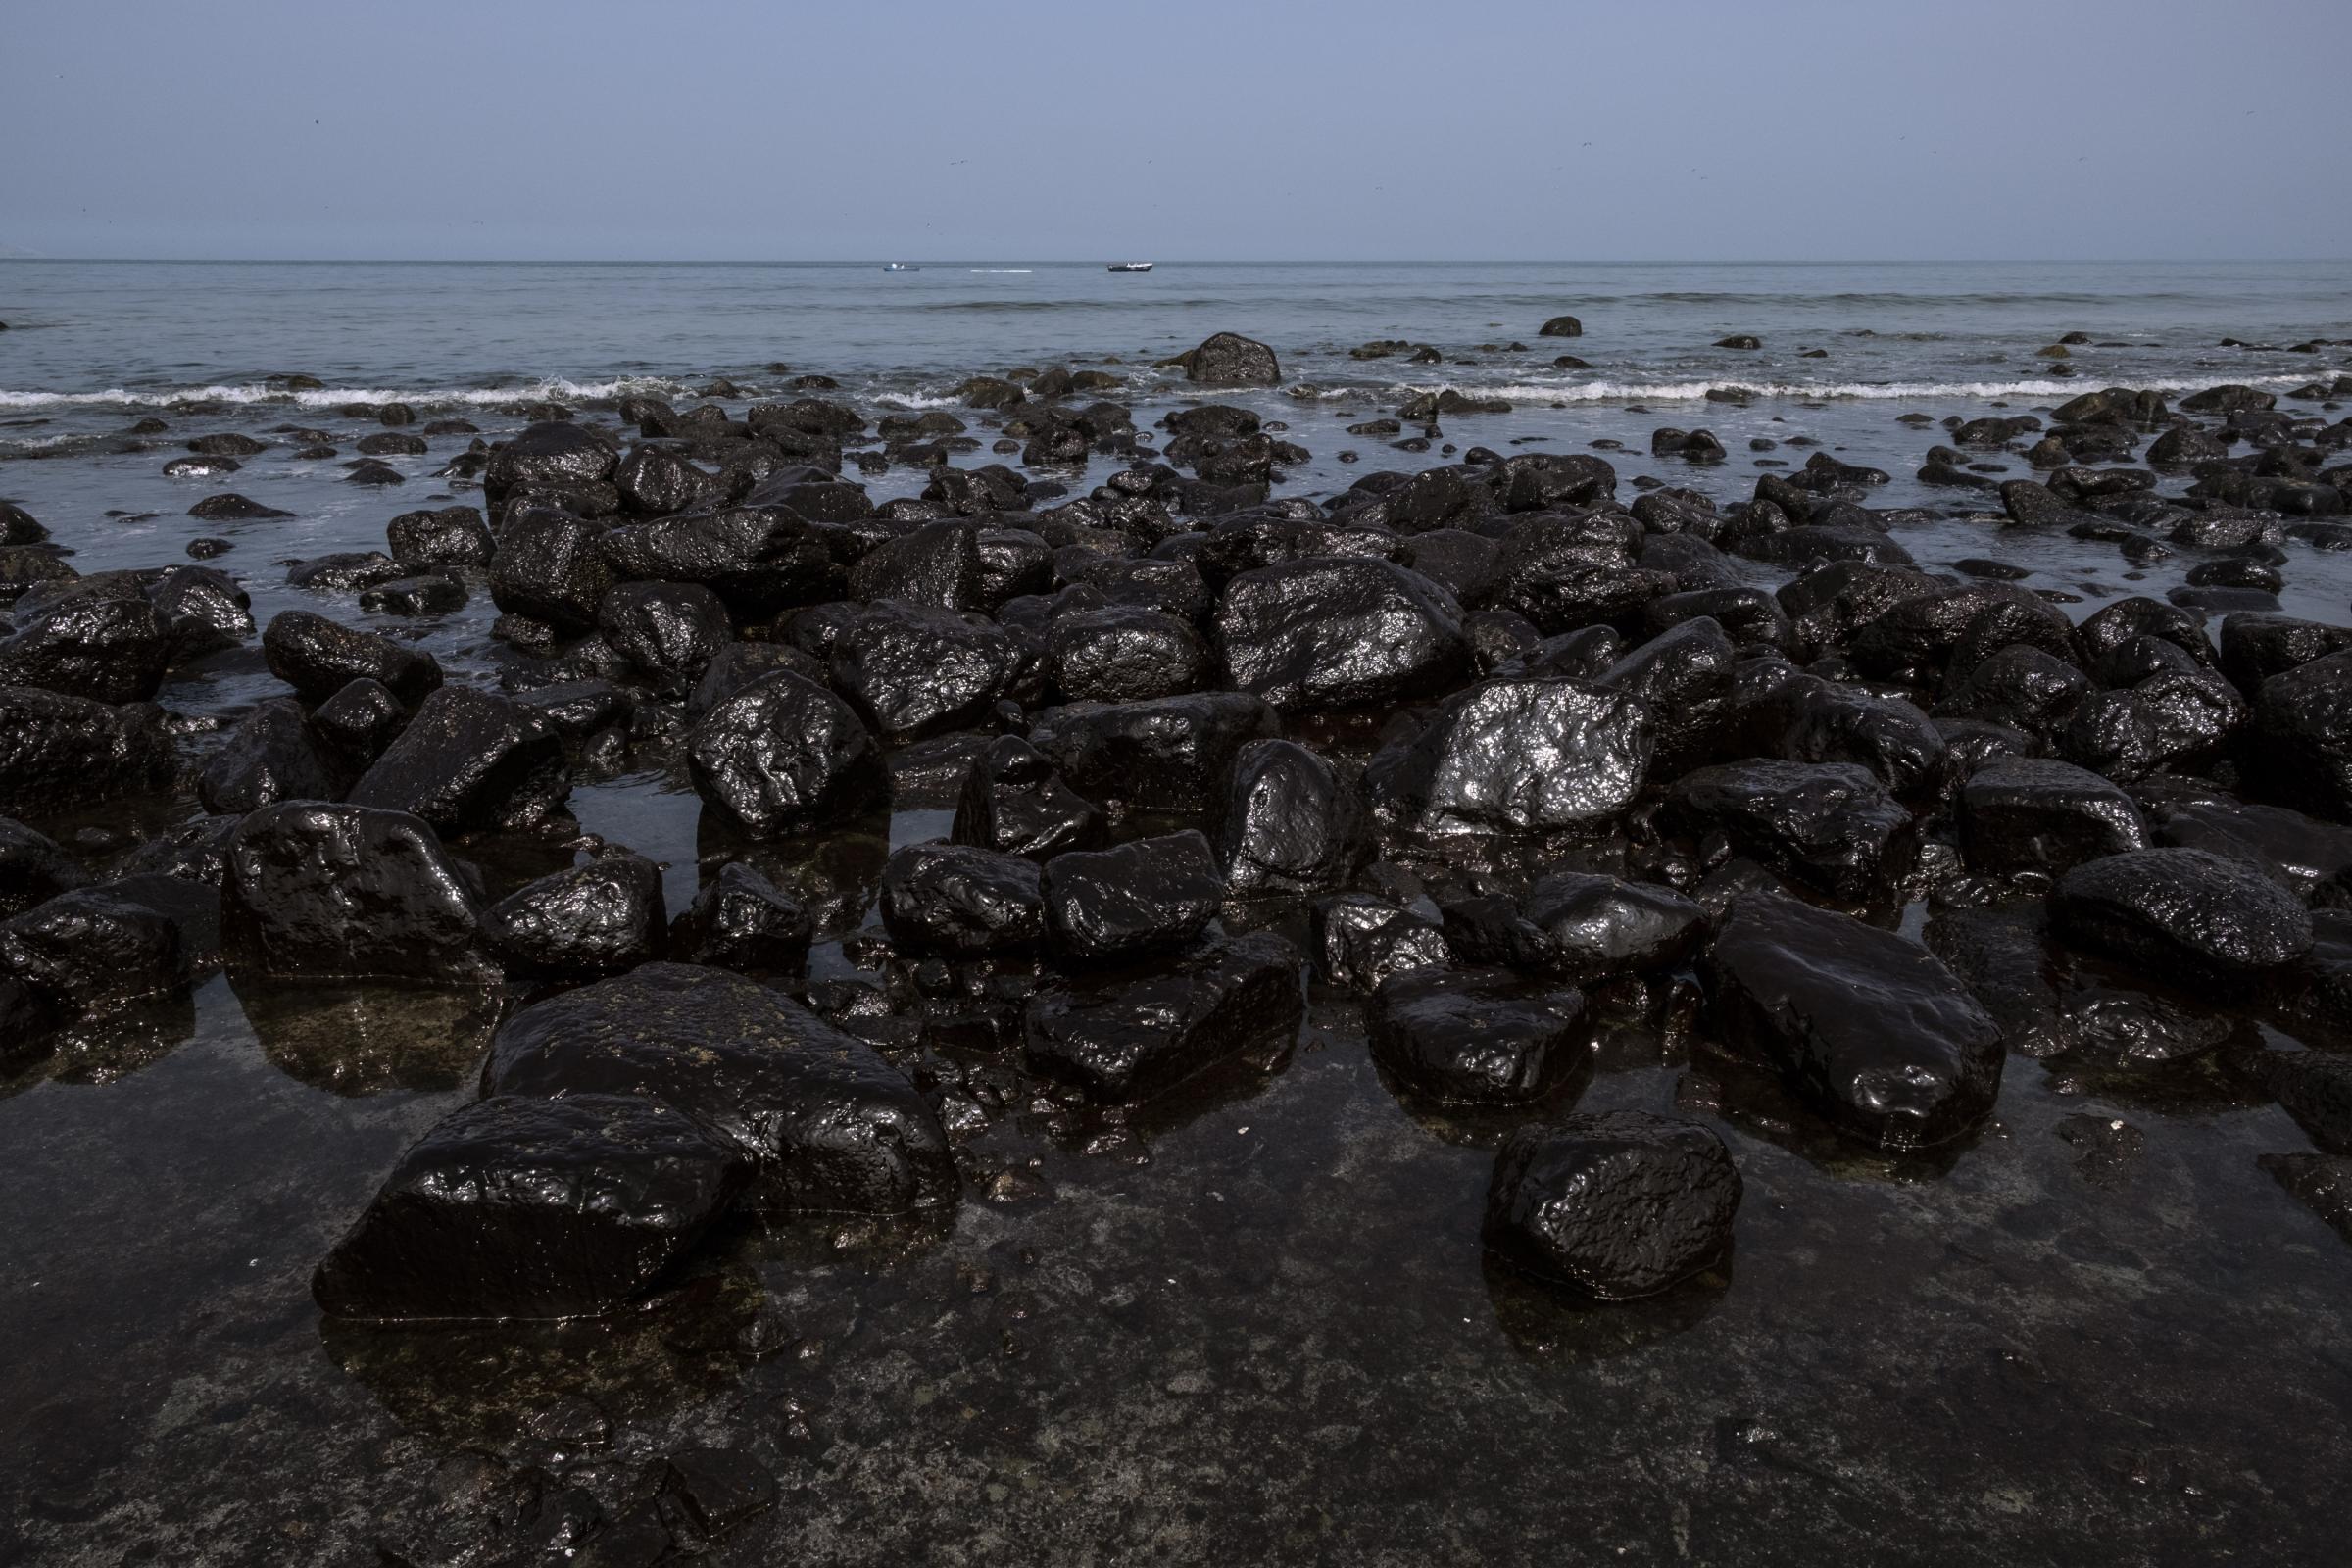 The oil spill in Peru - Crude oil on the beach of Ancon, north of Lima.